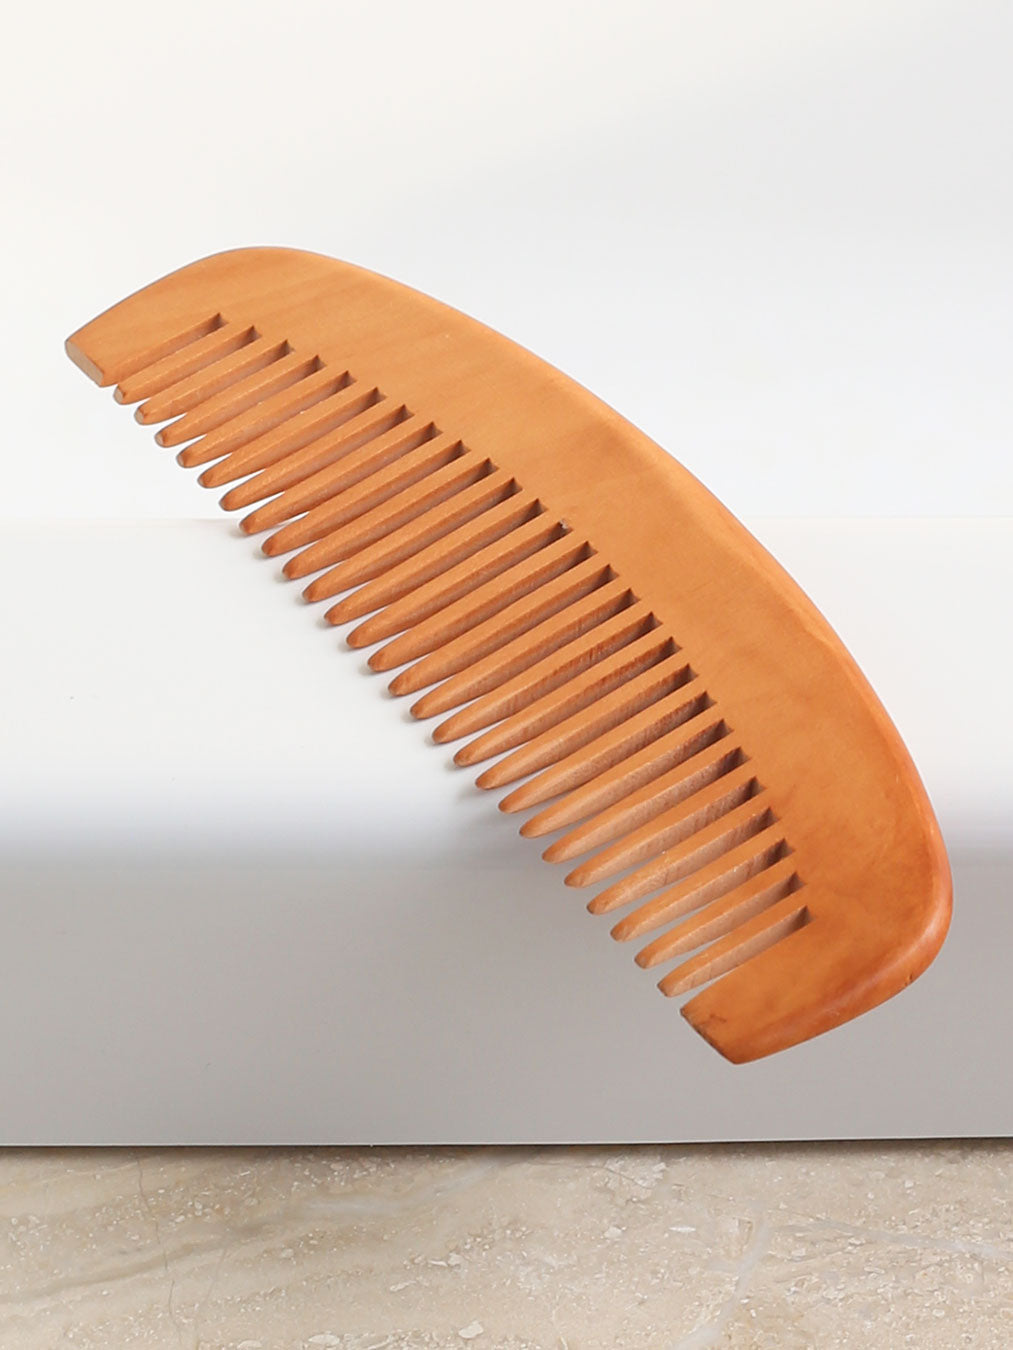 Natural light wood combs for thick healthy hair